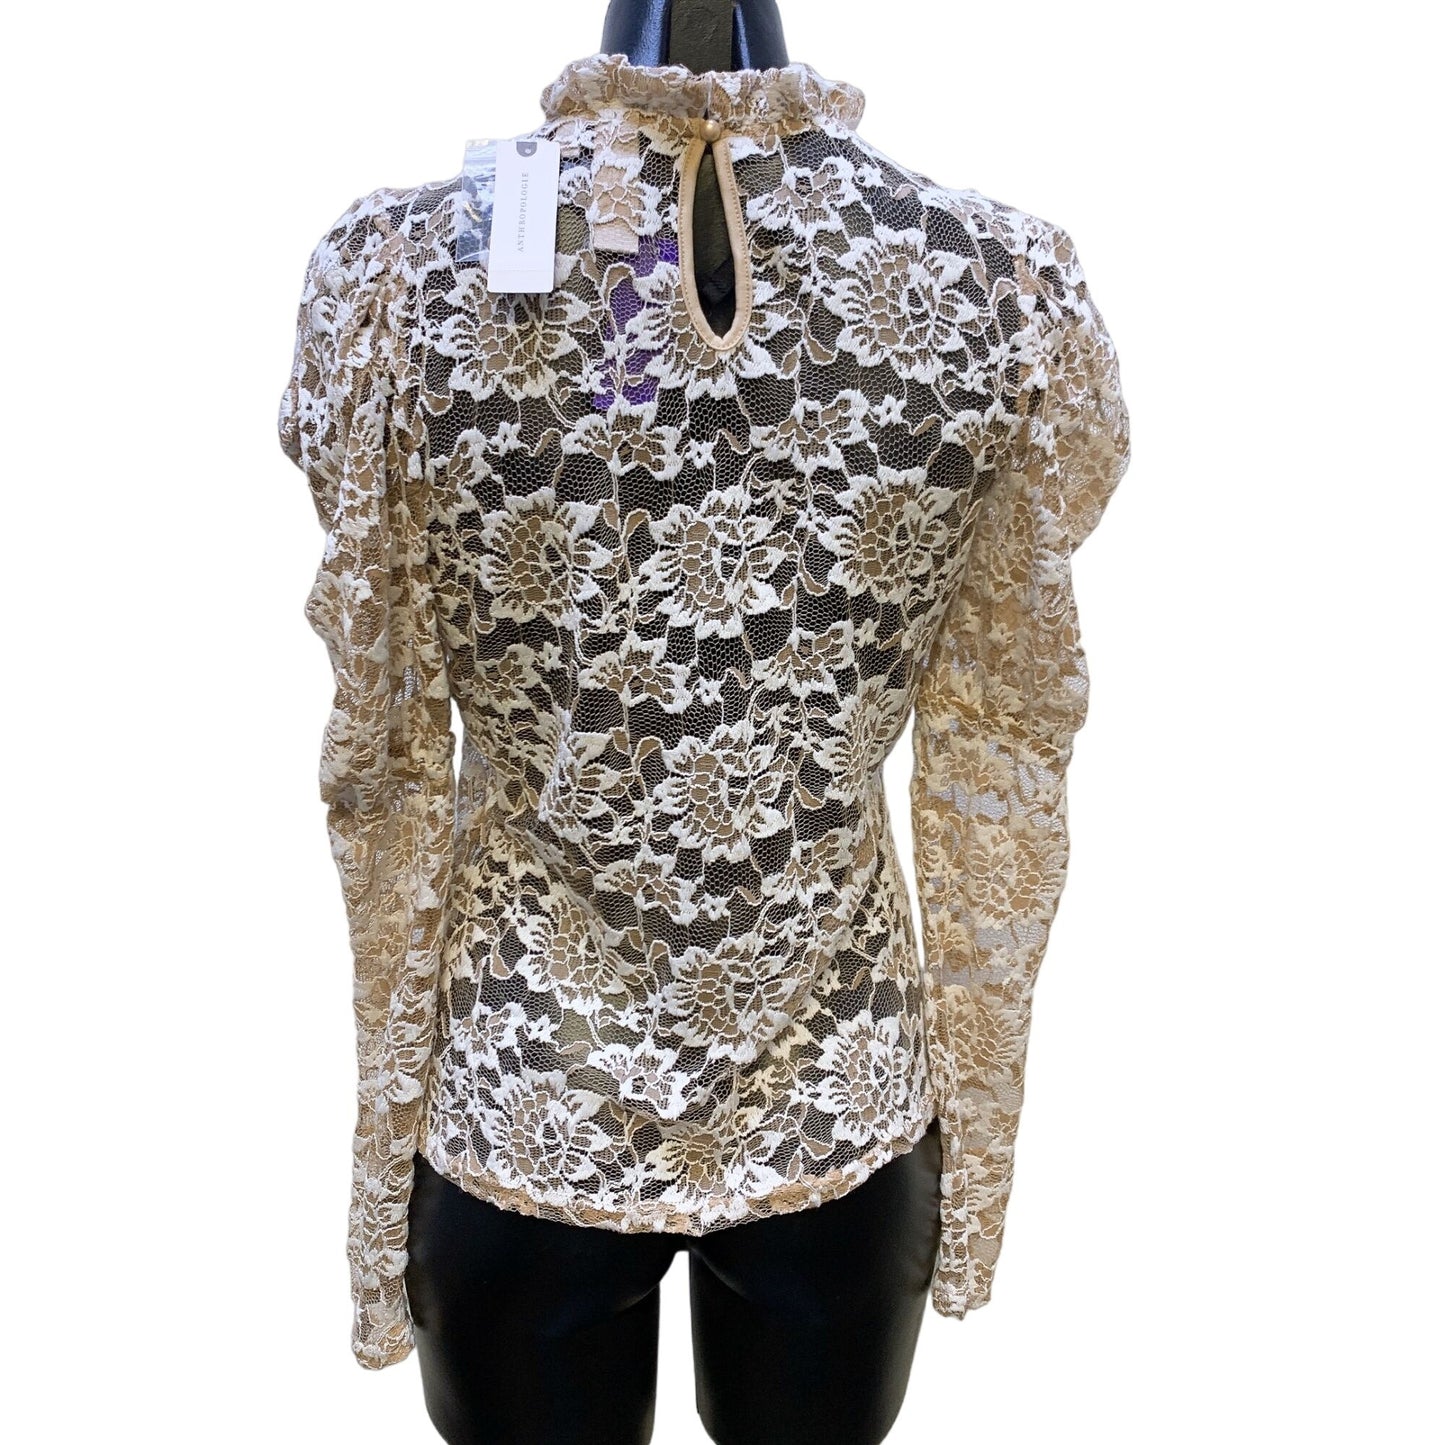 *NWT Dolan Anthropologie Ivory Lace Blouse Small